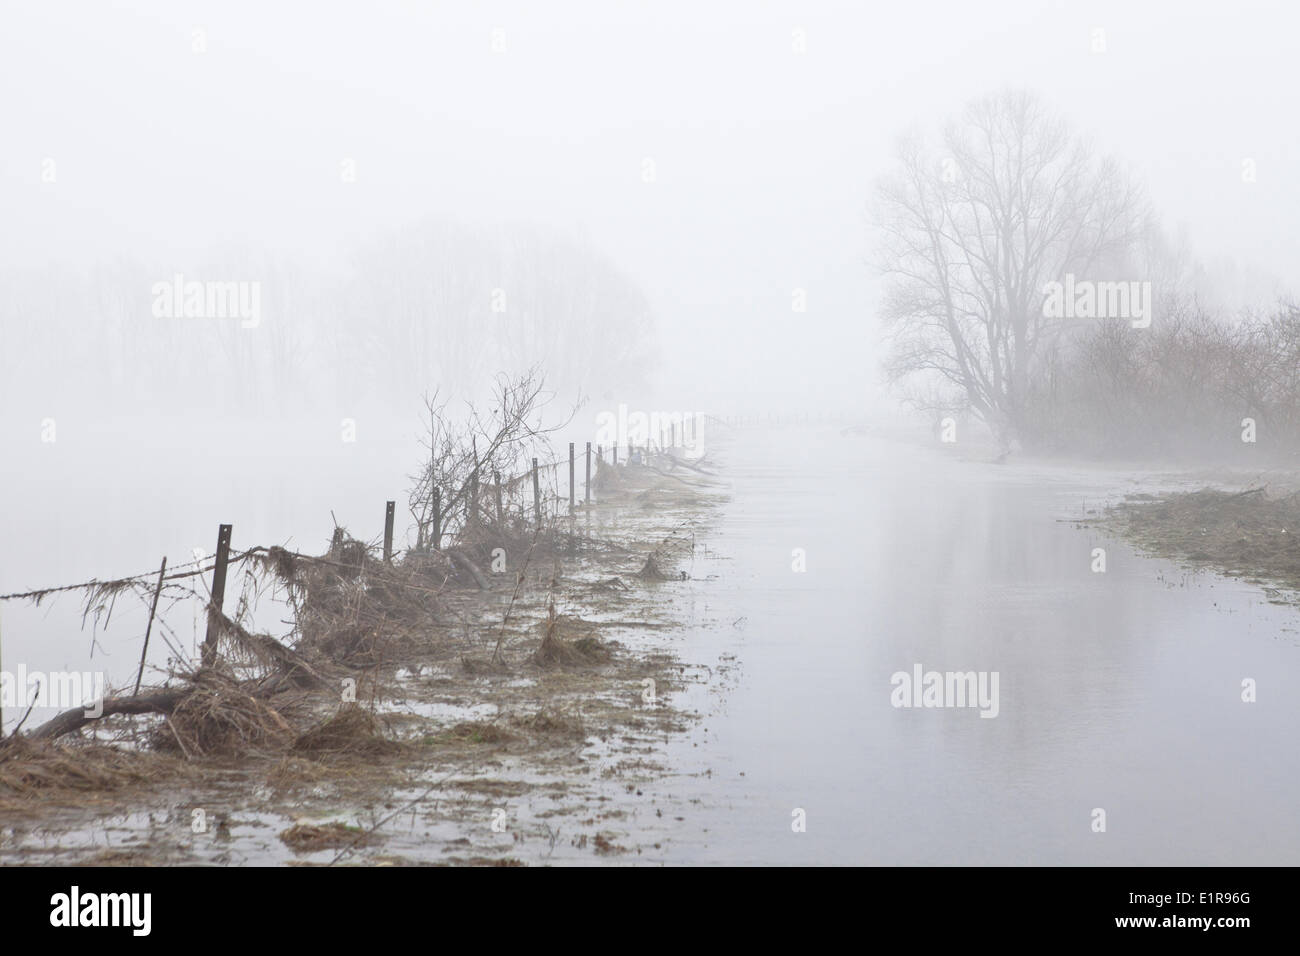 The flood plains of the Waal are filled with water during high waterlevels in winter. Stock Photo